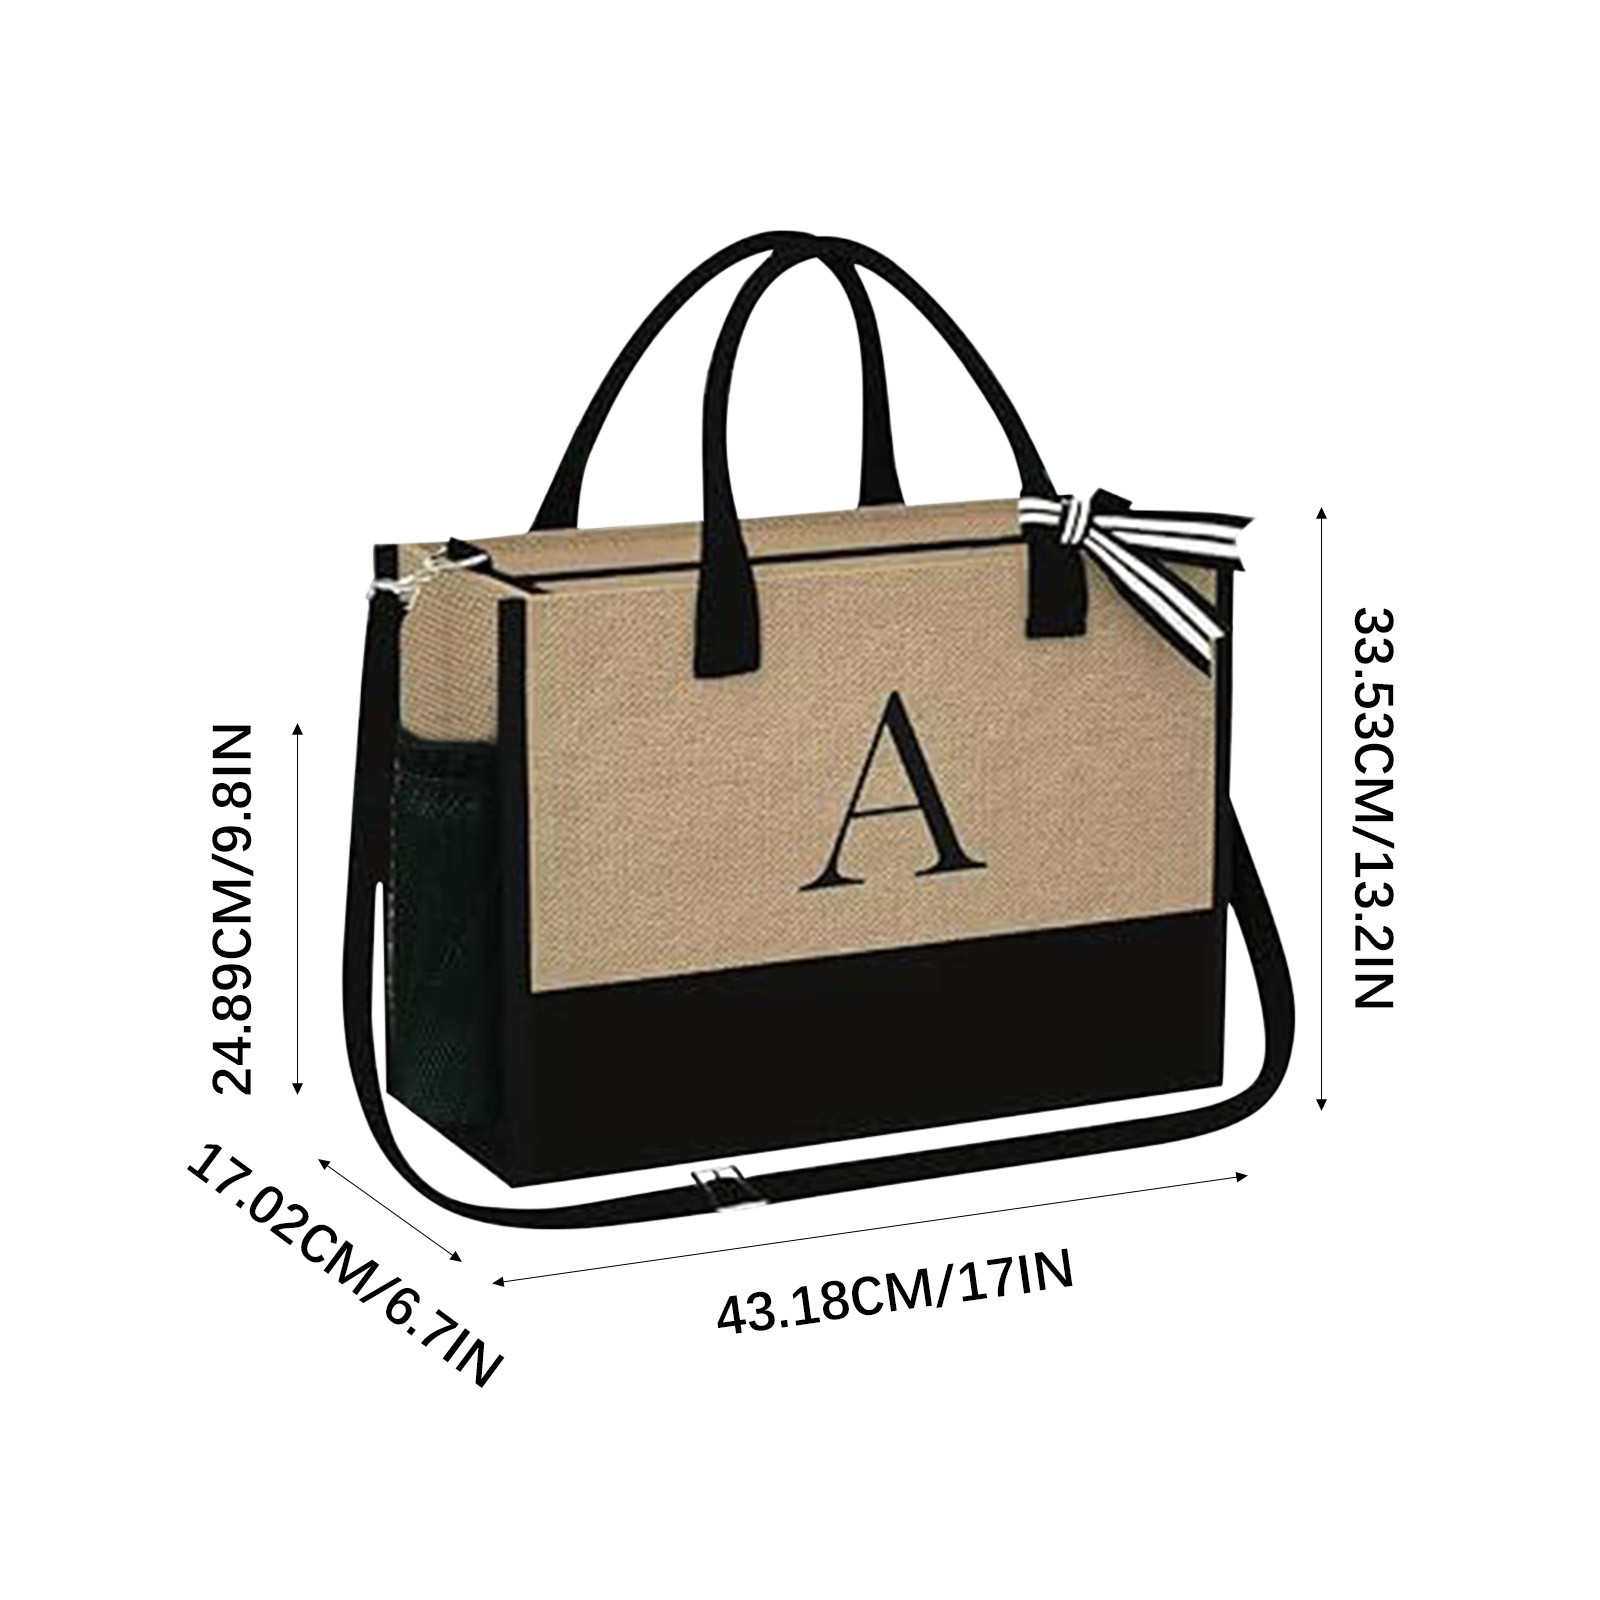 Bento Boxes on Clearance Yoolife Initials Jute Tote Bag and Cosmetic ...